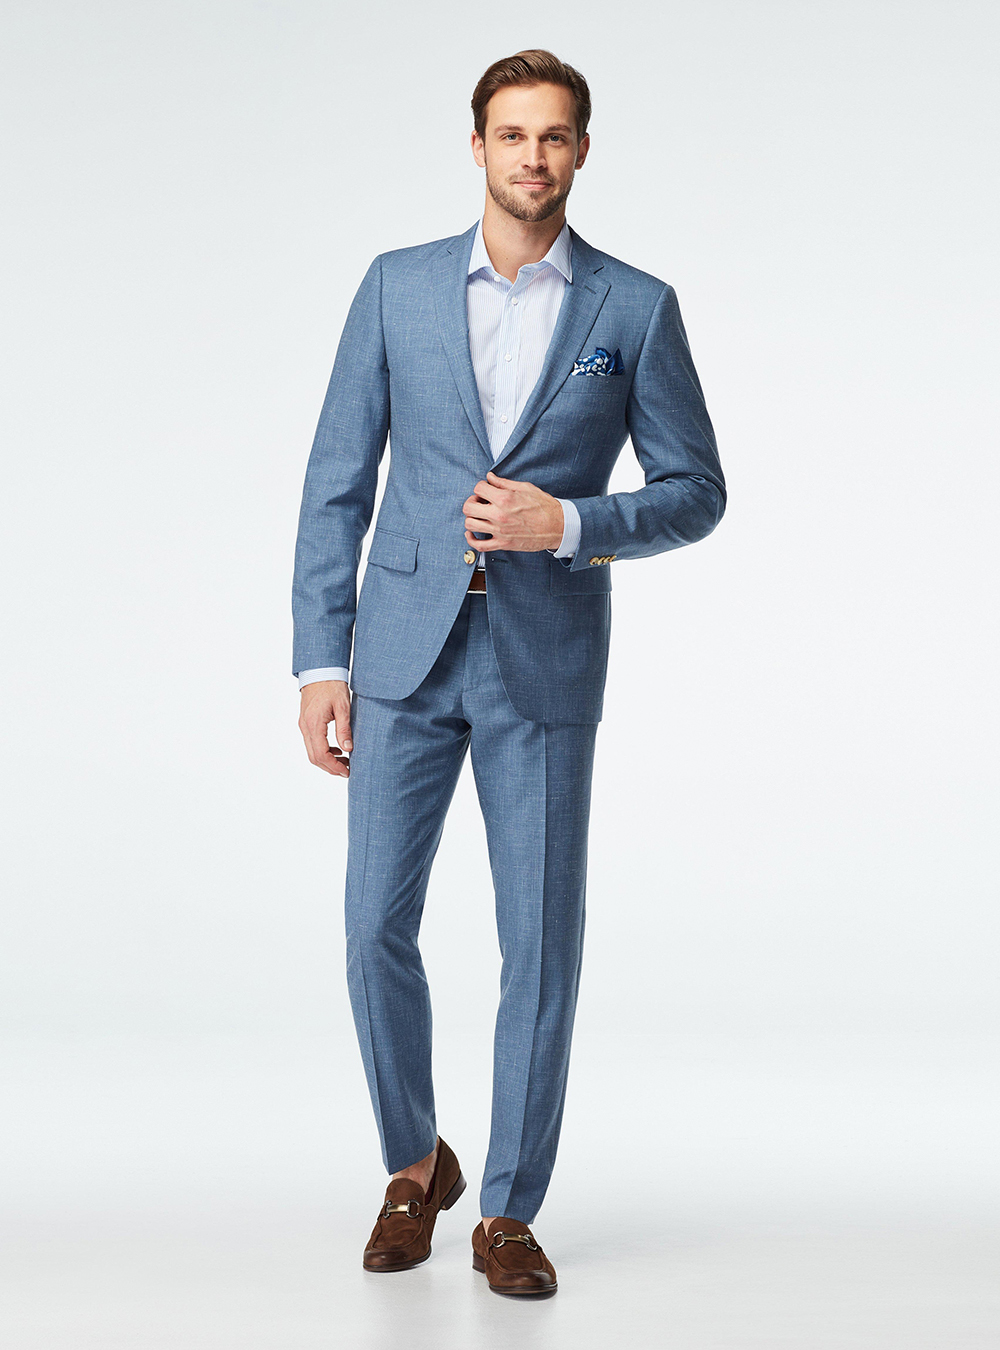 blue suit, light blue dress shirt, and brown loafers